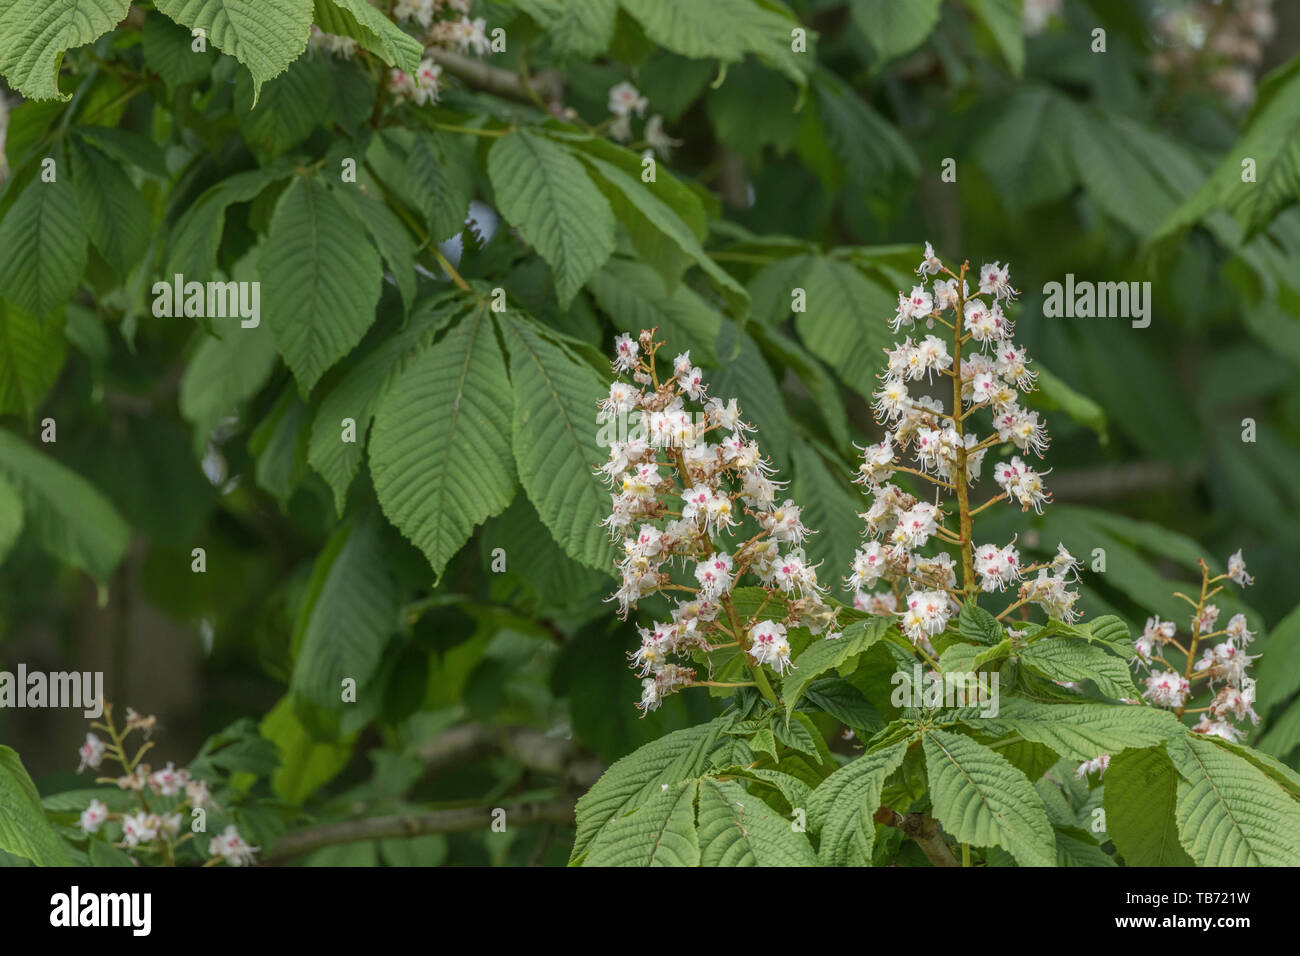 Flowering Horse Chestnut / Aesculus hippocastanum in Spring sunshine. Once used as a medicinal plant in herbal remedies. Stock Photo